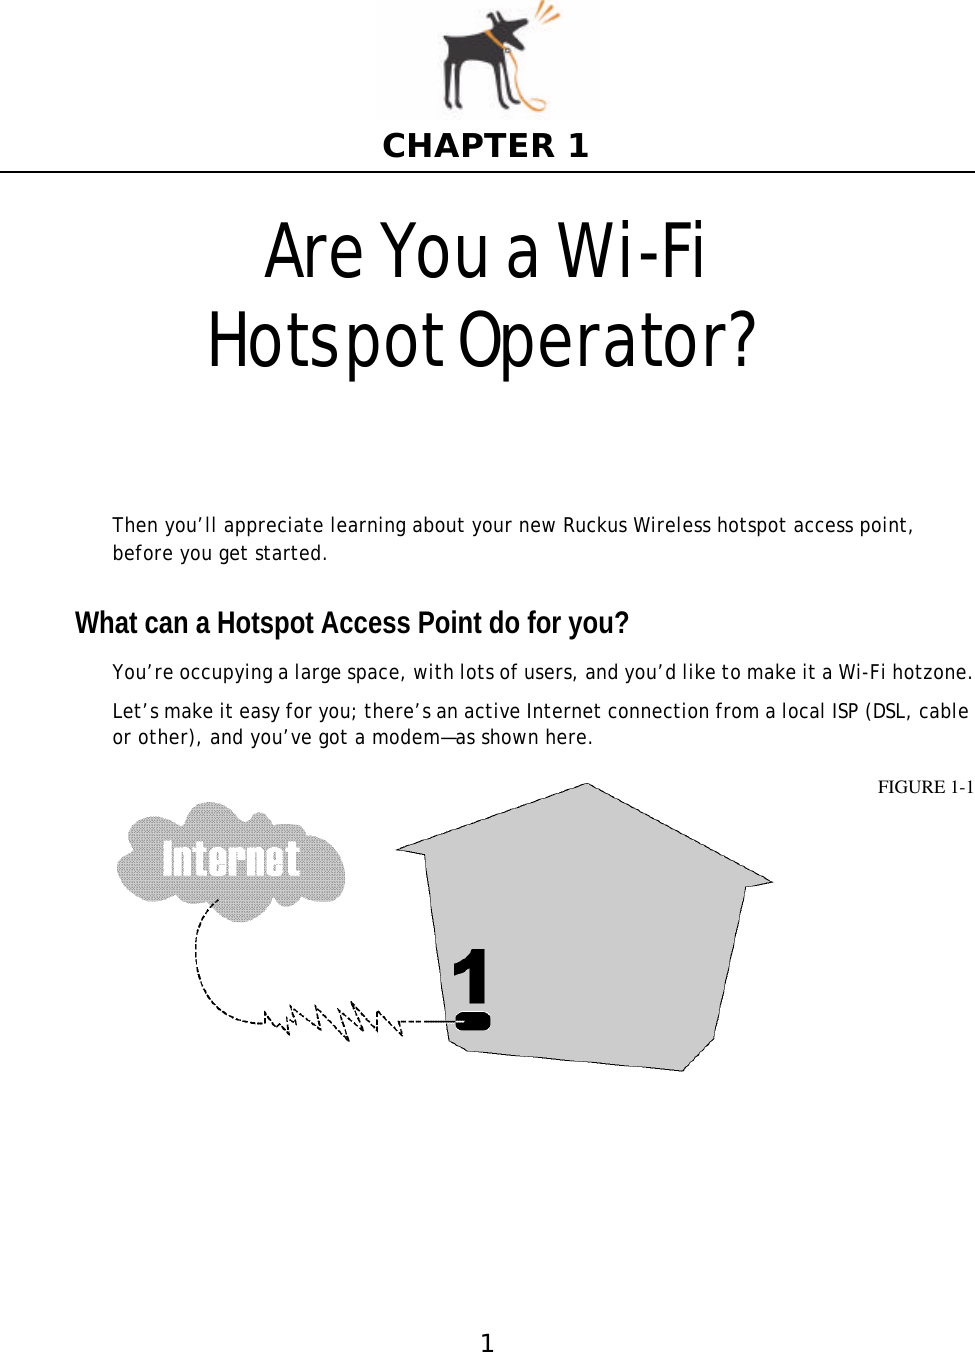 1CHAPTER 1Are You a Wi-Fi HotspotOperator?Then you’ll appreciate learning about your new Ruckus Wireless hotspot access point, before you get started.What can a Hotspot Access Point do for you?You’re occupying a large space, with lots of users, and you’d like to make it a Wi-Fi hotzone.Let’s make it easy for you; there’s an active Internet connection from a local ISP (DSL, cable or other), and you’ve got a modem—as shown here. FIGURE 1-1